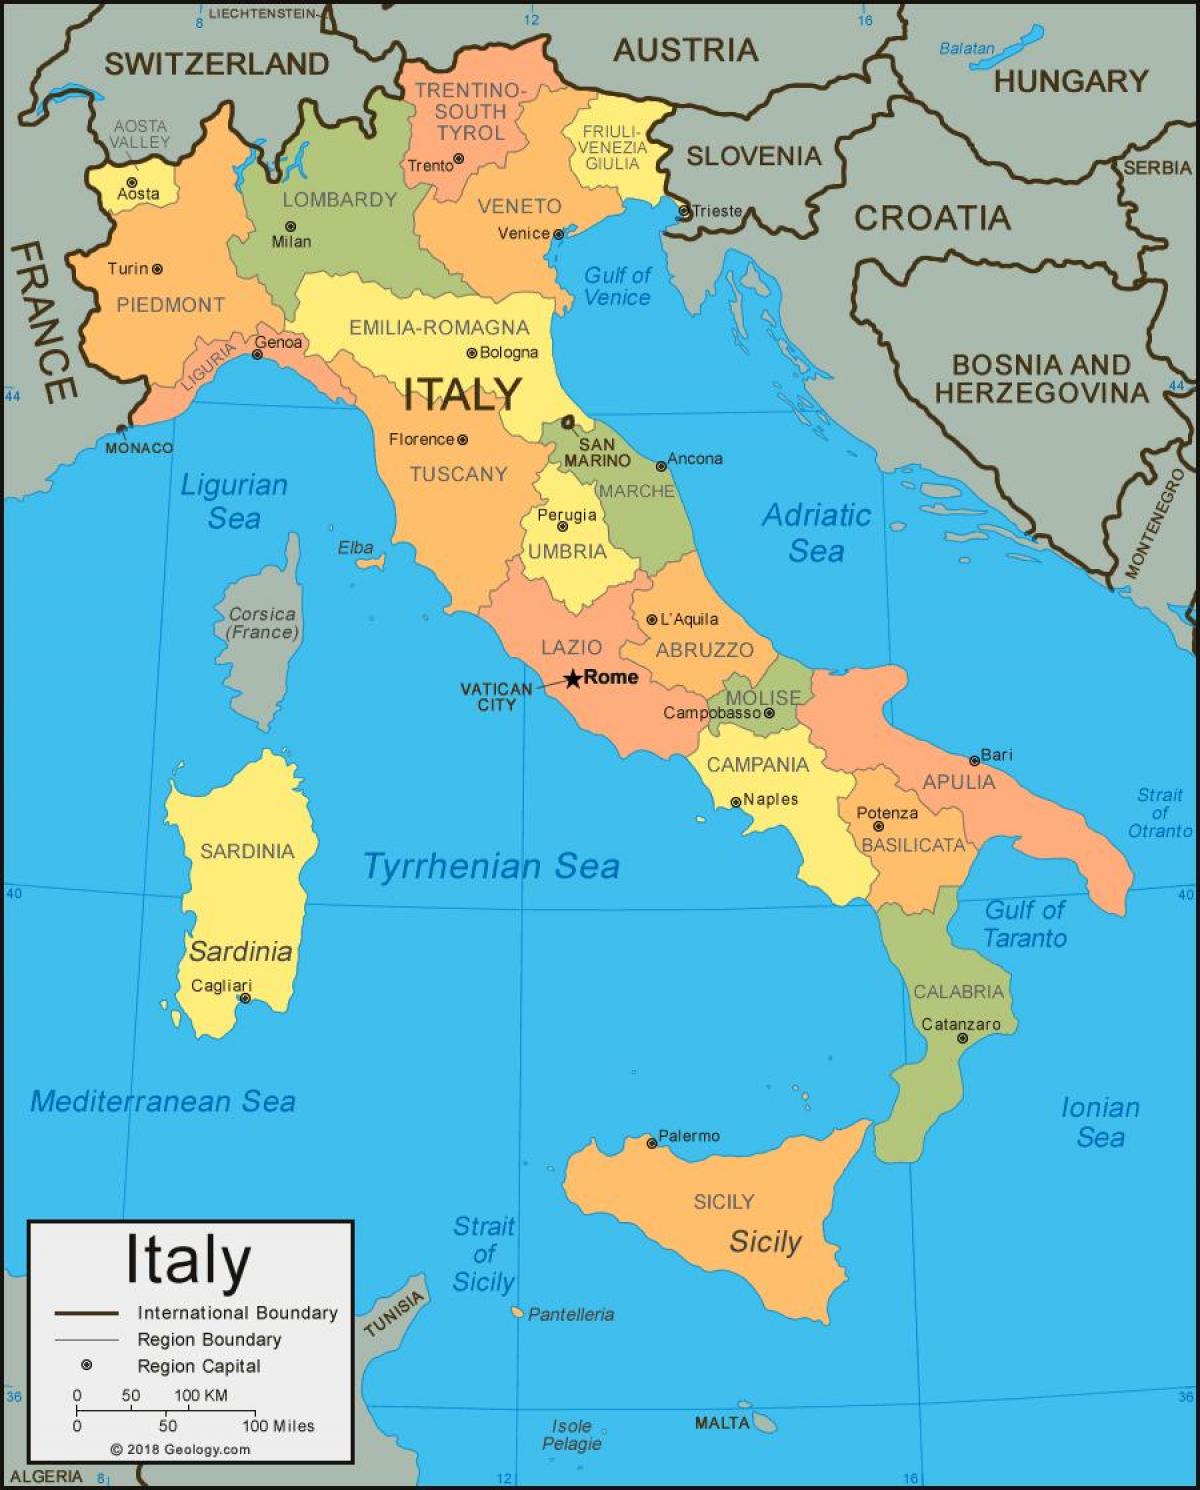 show me a map of Italy